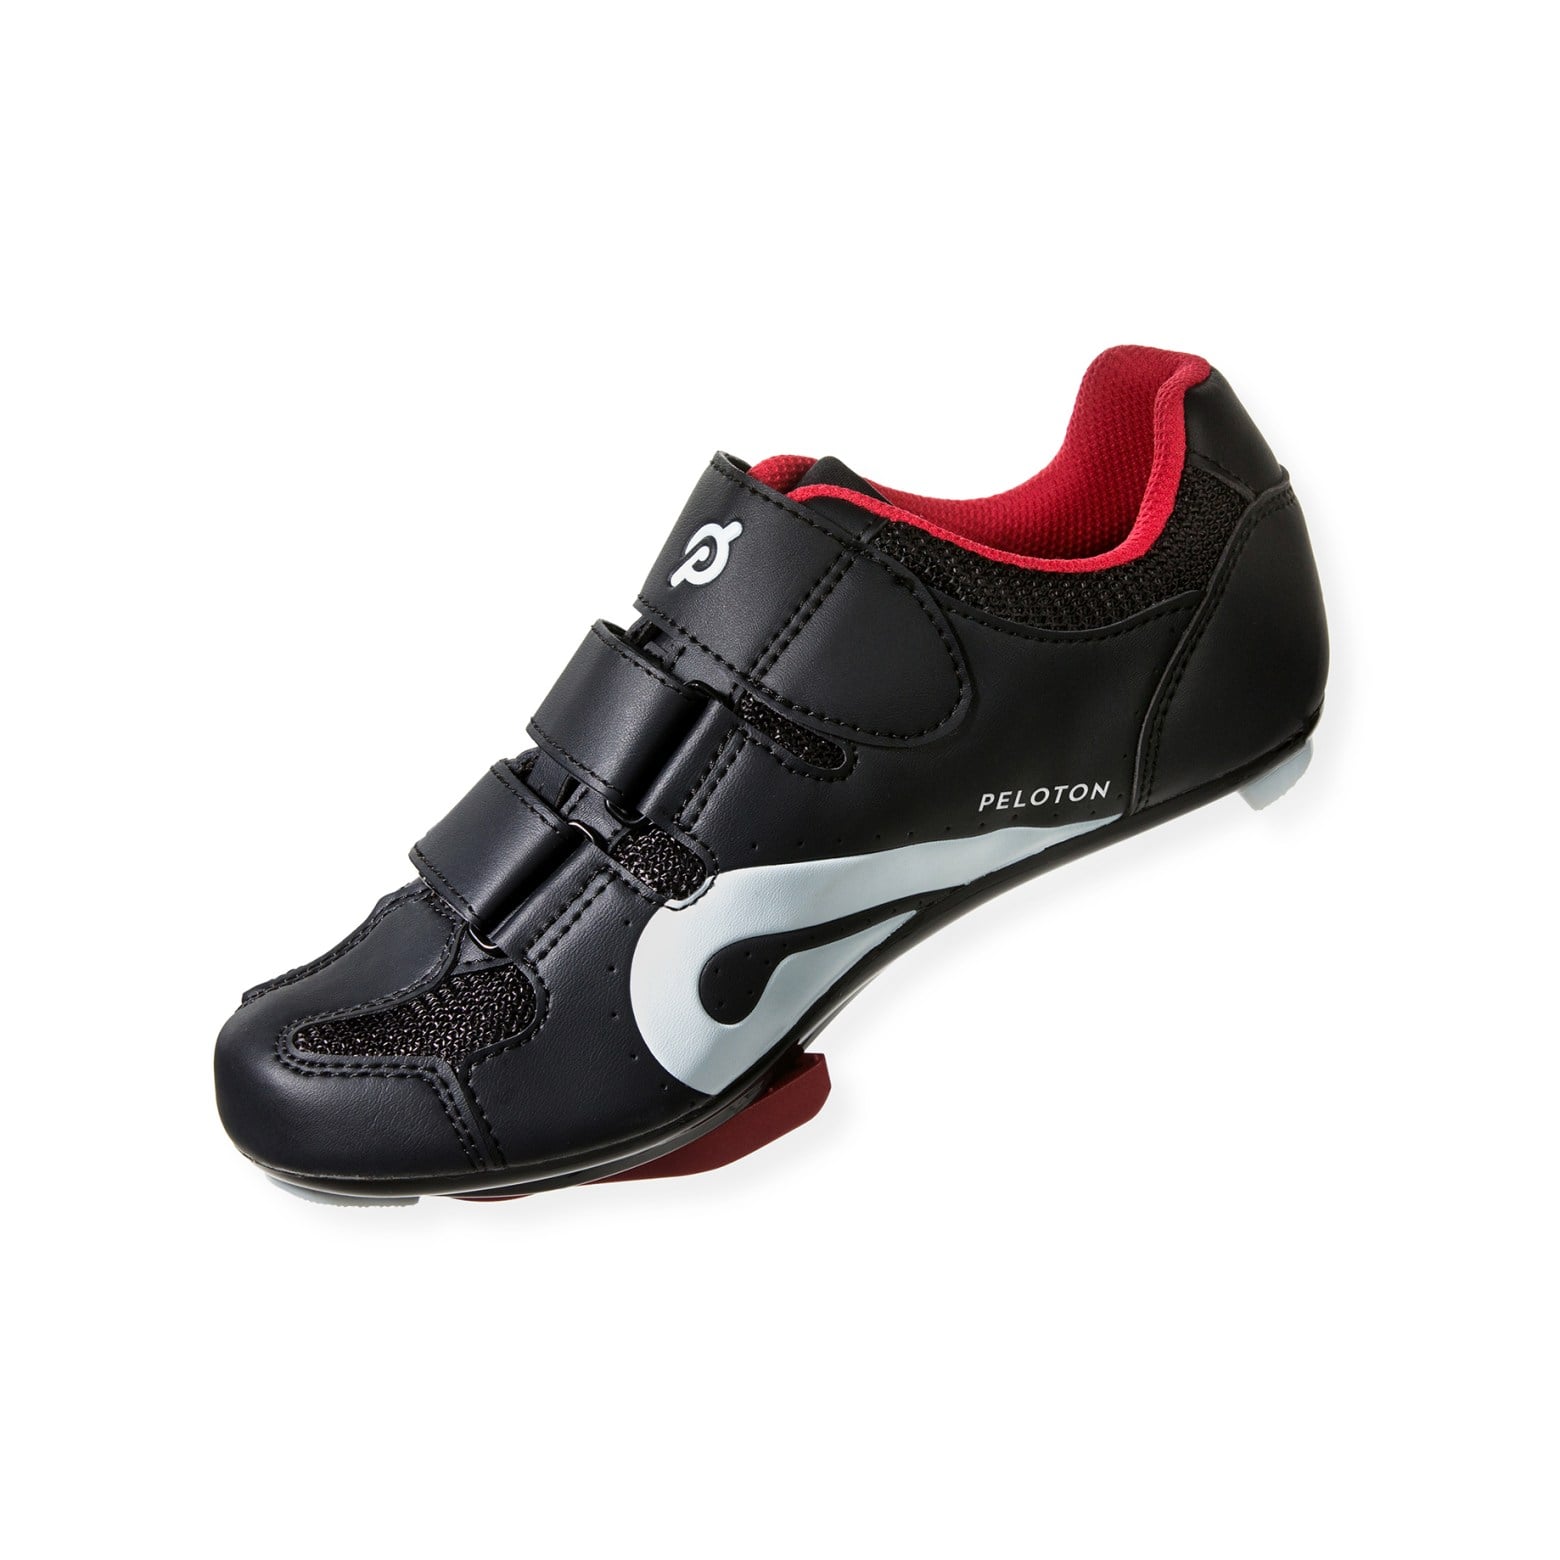 Shoes That Fit the Peloton At-Home Bike 